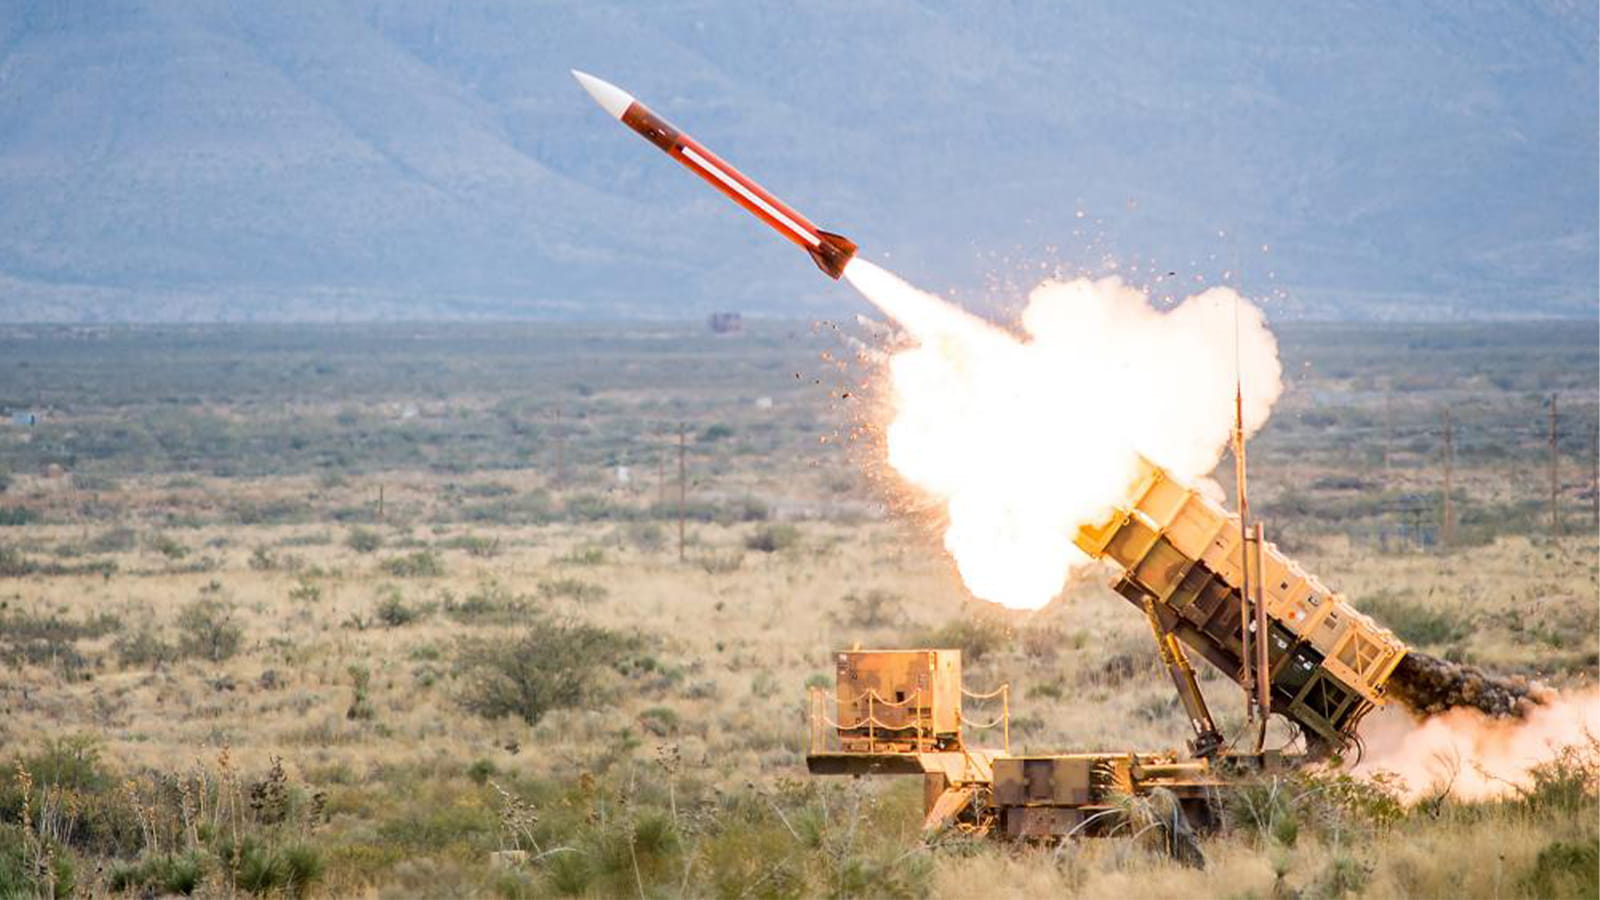 GEM-T, the Patriot Advanced Capability 2 (PAC-2) missile interceptor enhanced for defeating tactical ballistic missiles, is a primary effector for the combat-proven Patriot® air and missile defense system.